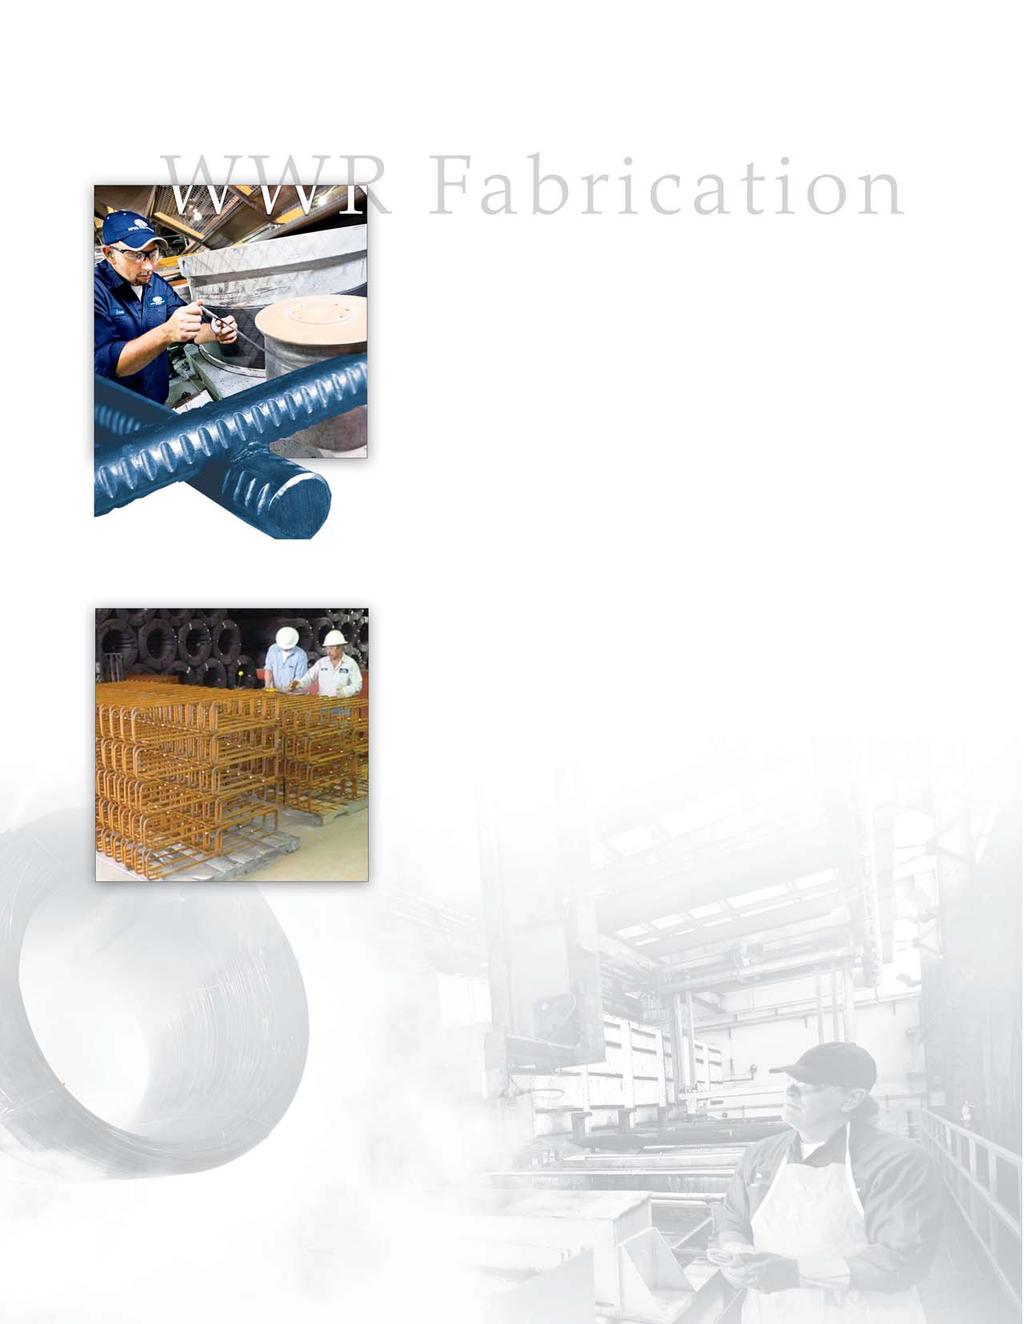 WWR Fabrication WWR Fabrication Fabrication of WWR into various shapes is easy and flexible and can be accomplished by either Insteel (at the plant) or by the precaster.